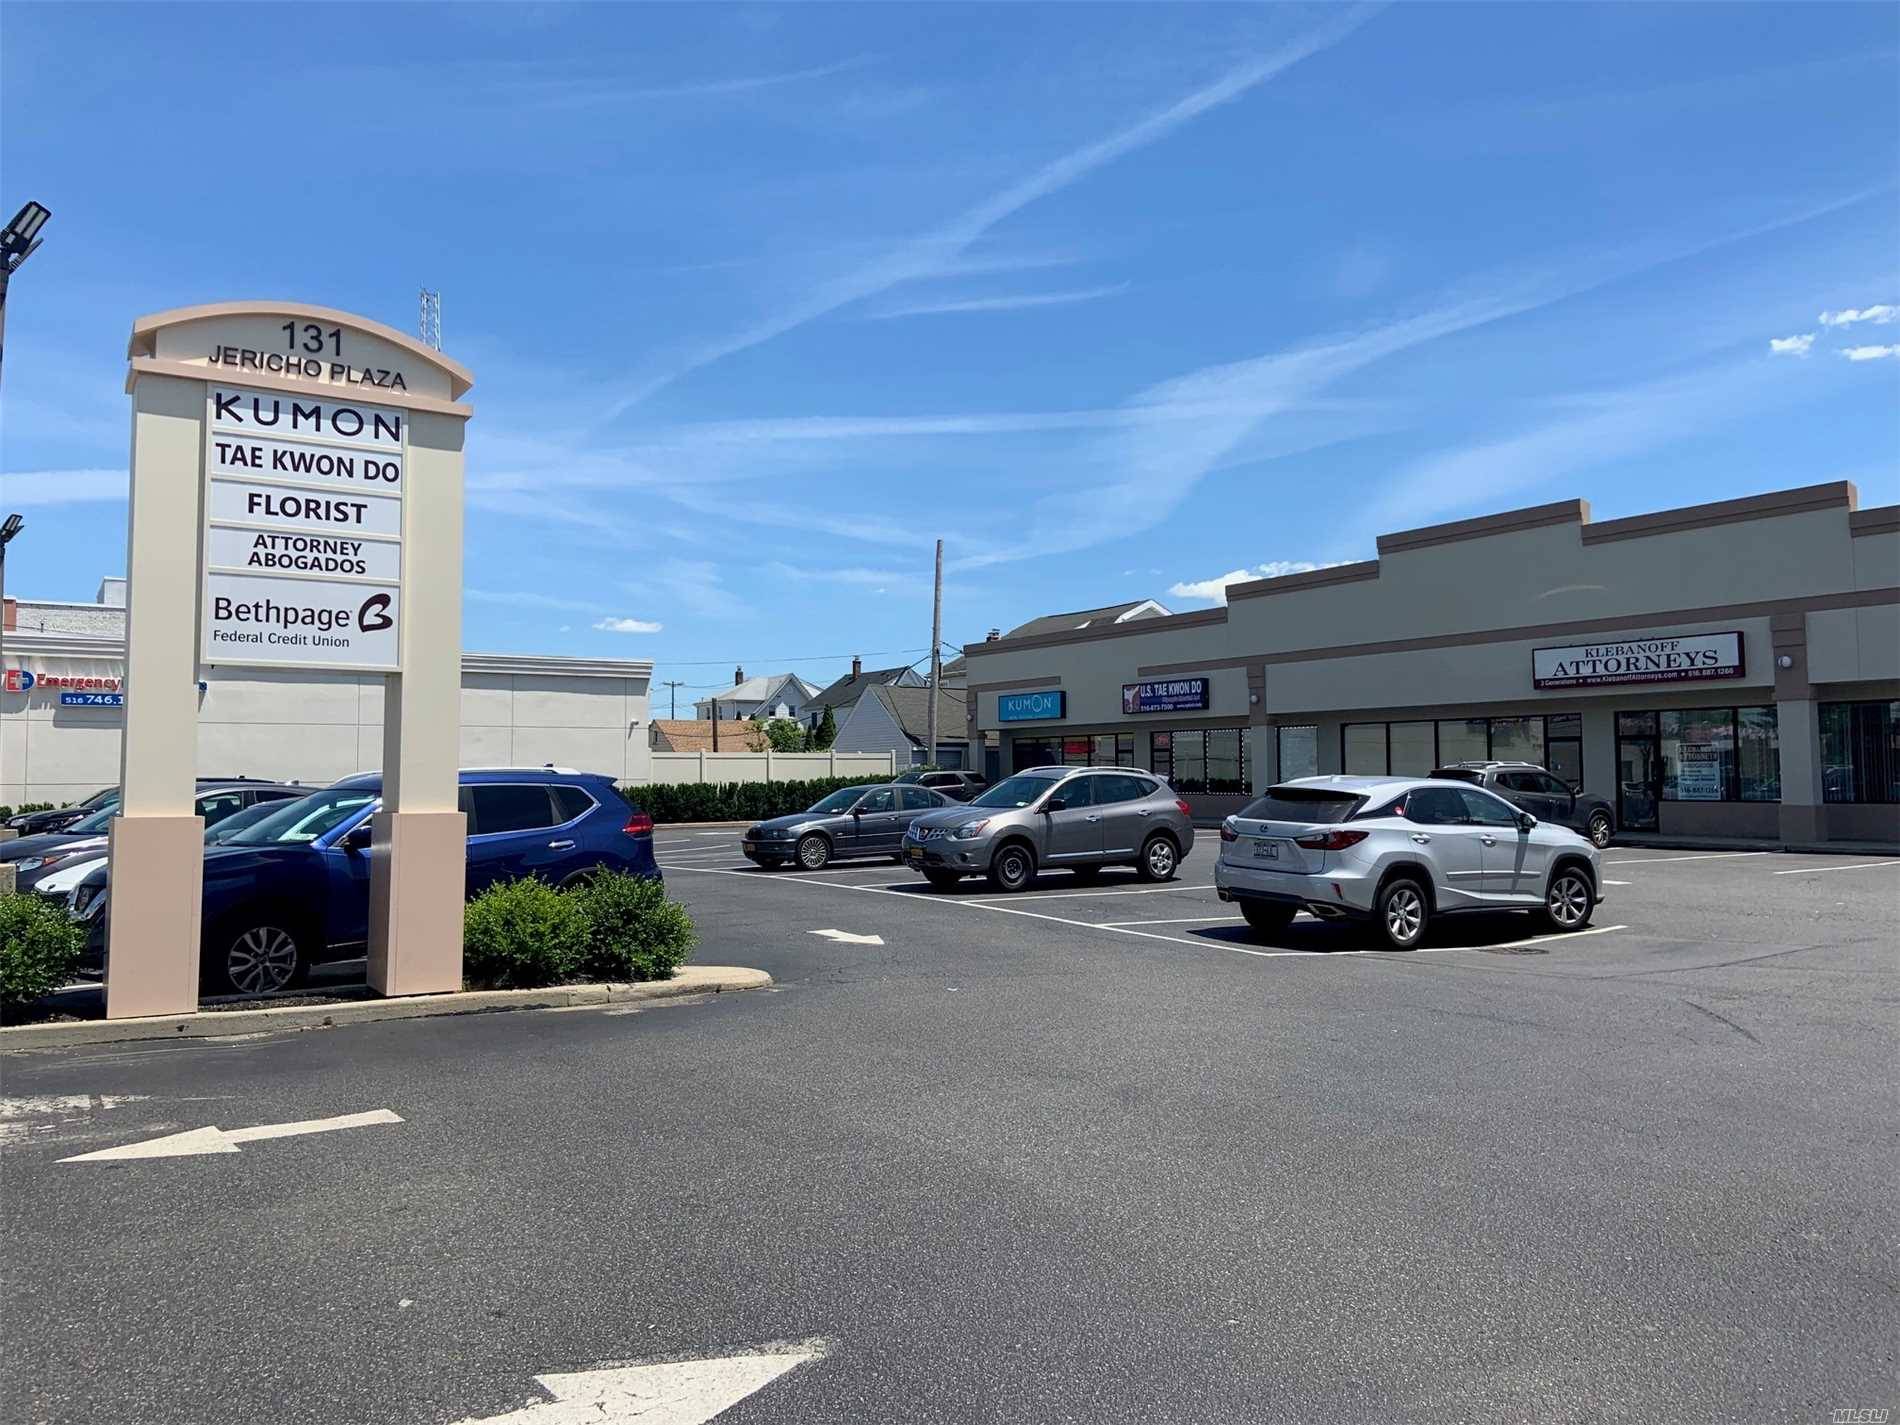 Mineola Perfect location in strip center on busy Jericho Turnpike.